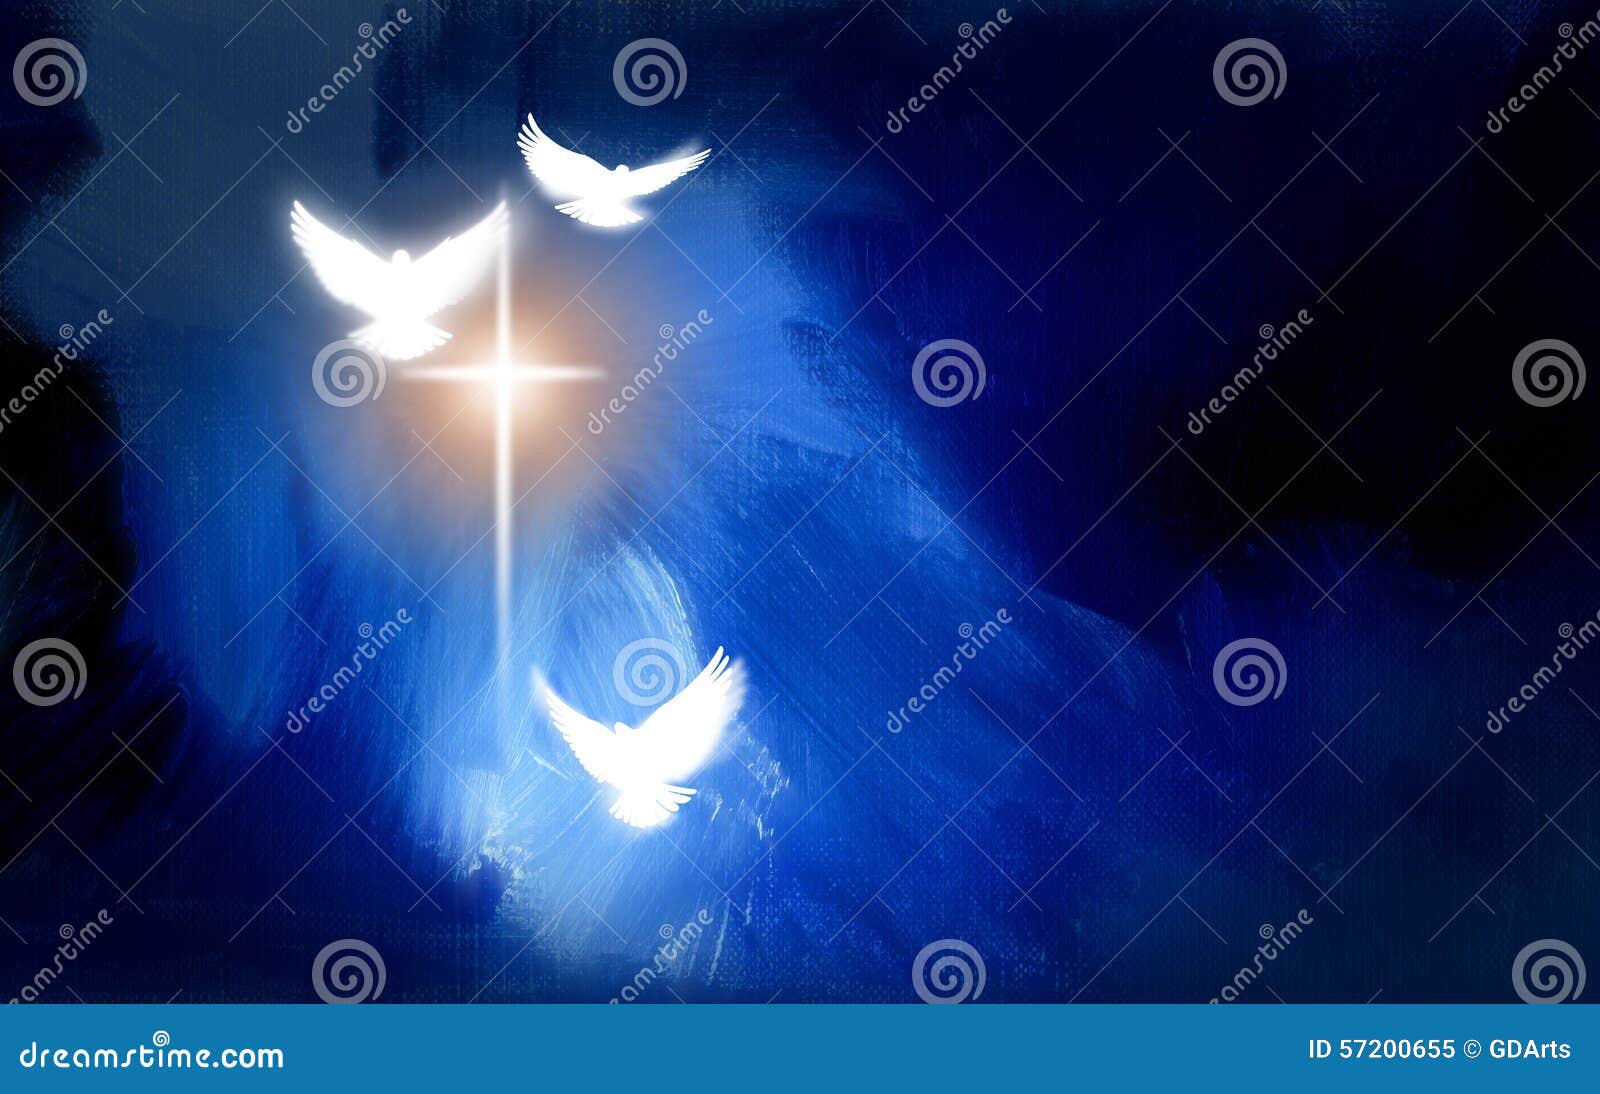 christian glowing cross with doves